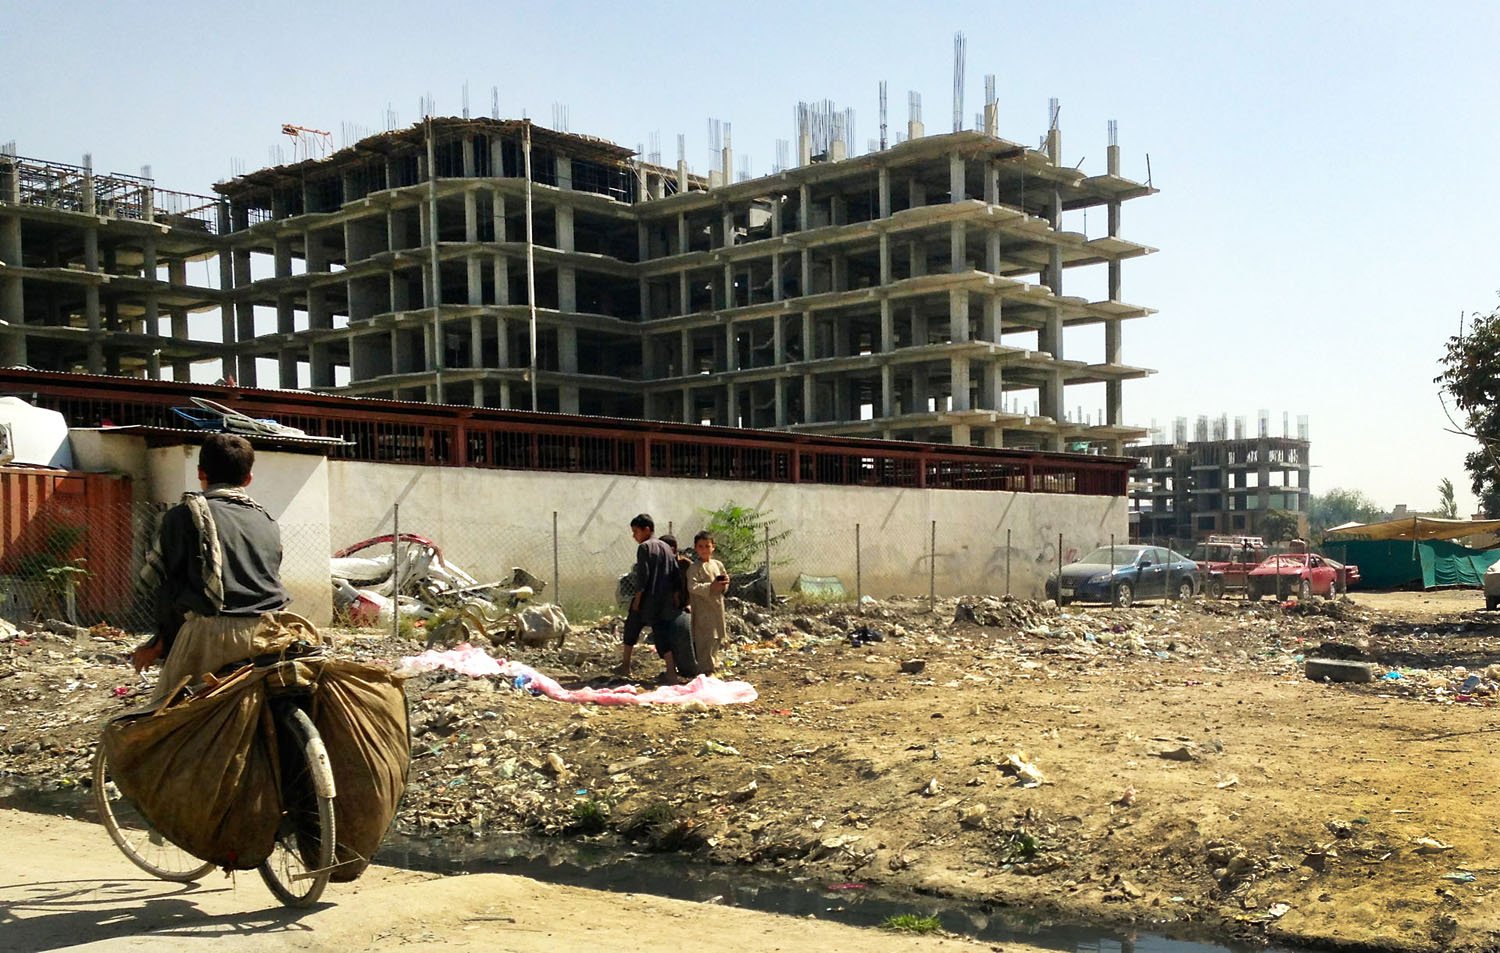 A stalled residential development in Kabul. The government hopes subsidies will prop up the property market. Photo: Lynne O'Donnell